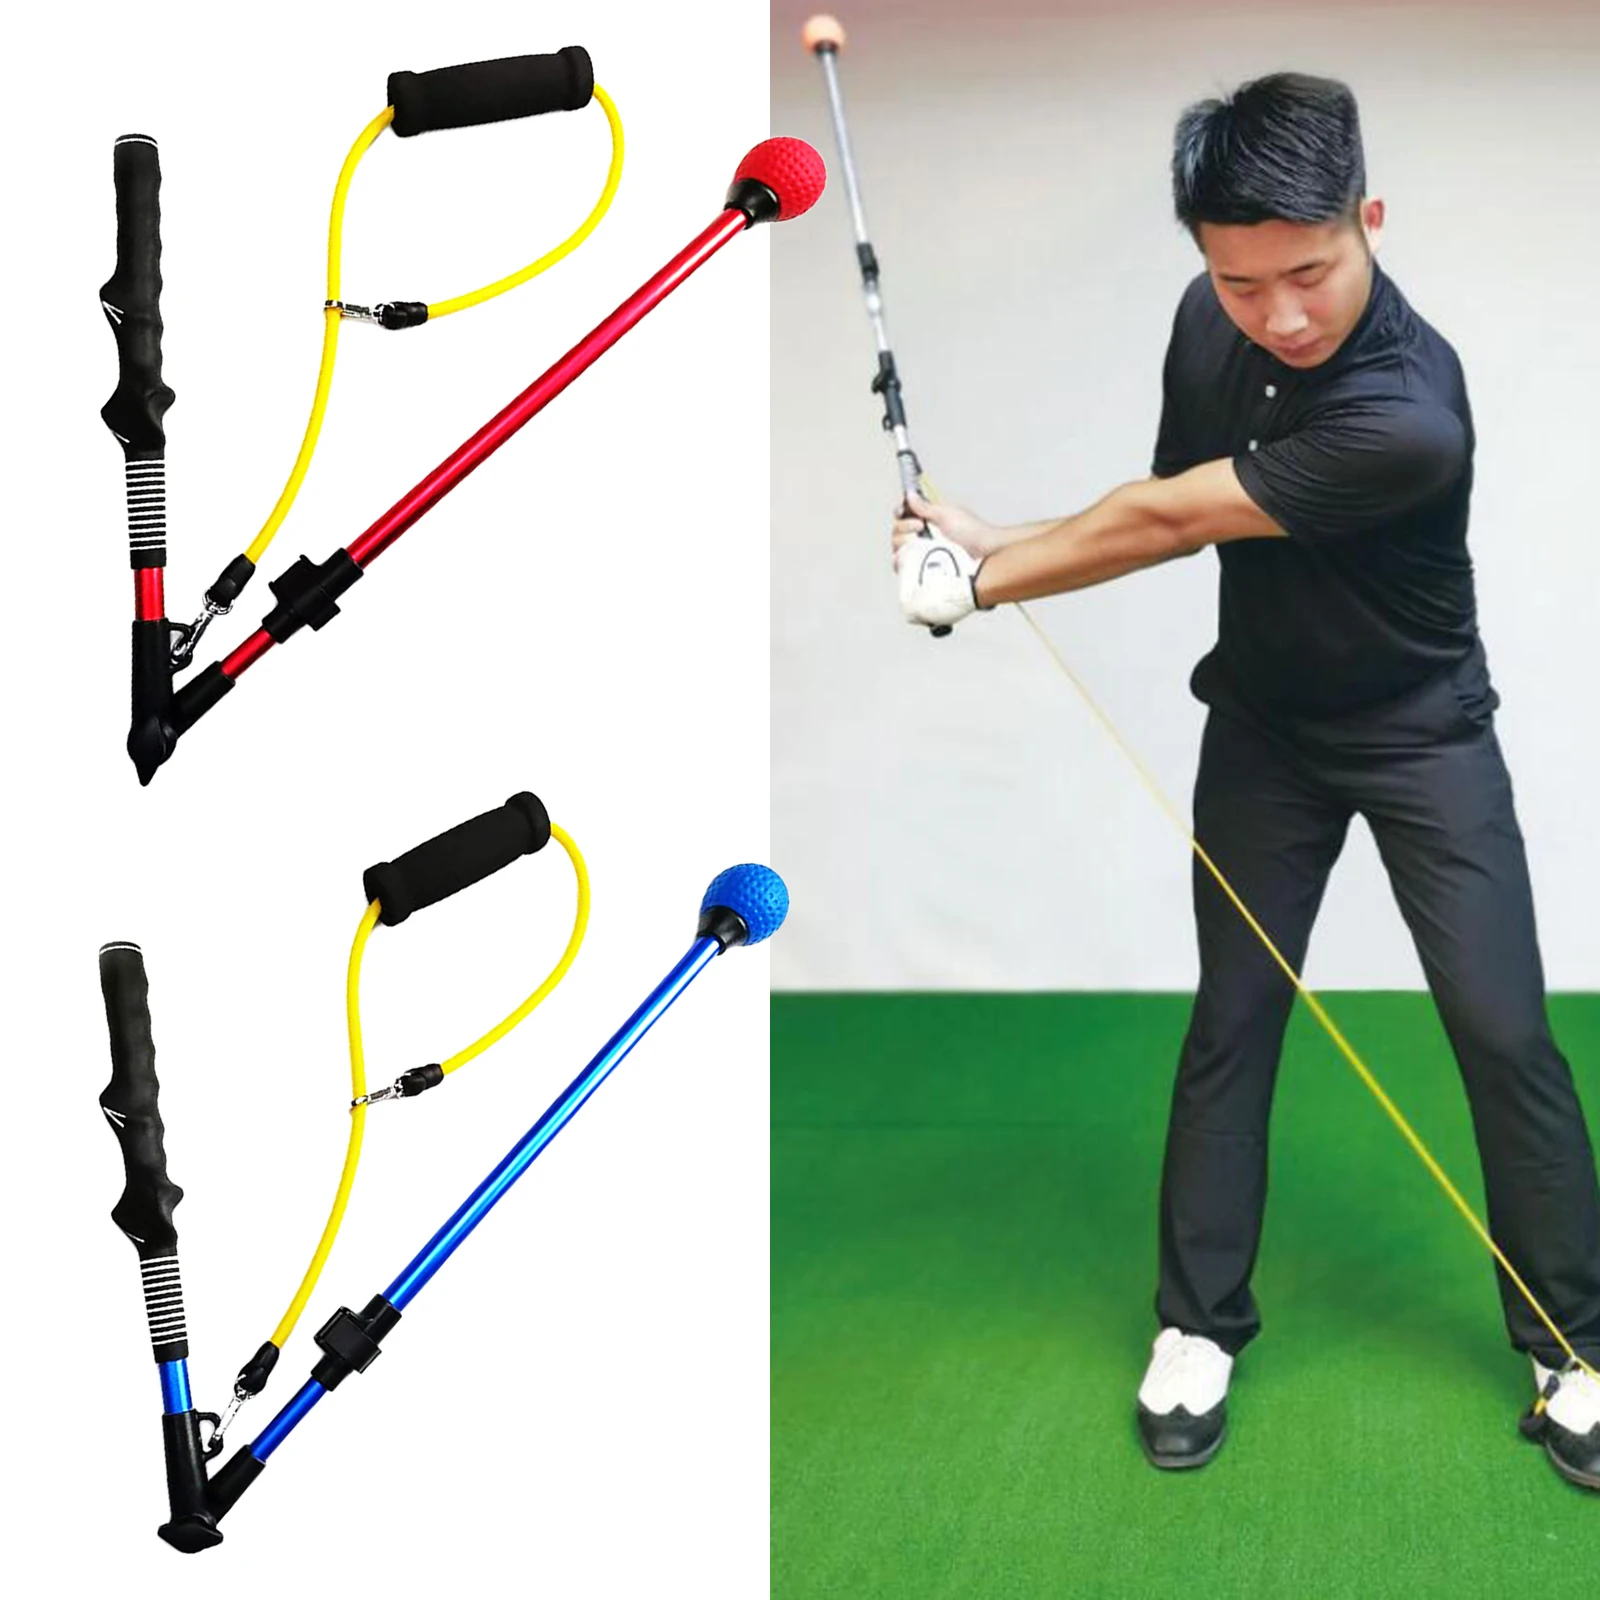 

Golf Swing Trainer Training Golf Grip Standard Teaching Aid Elbow Arms Practice Posture Corrector Guide Golf Training Aids